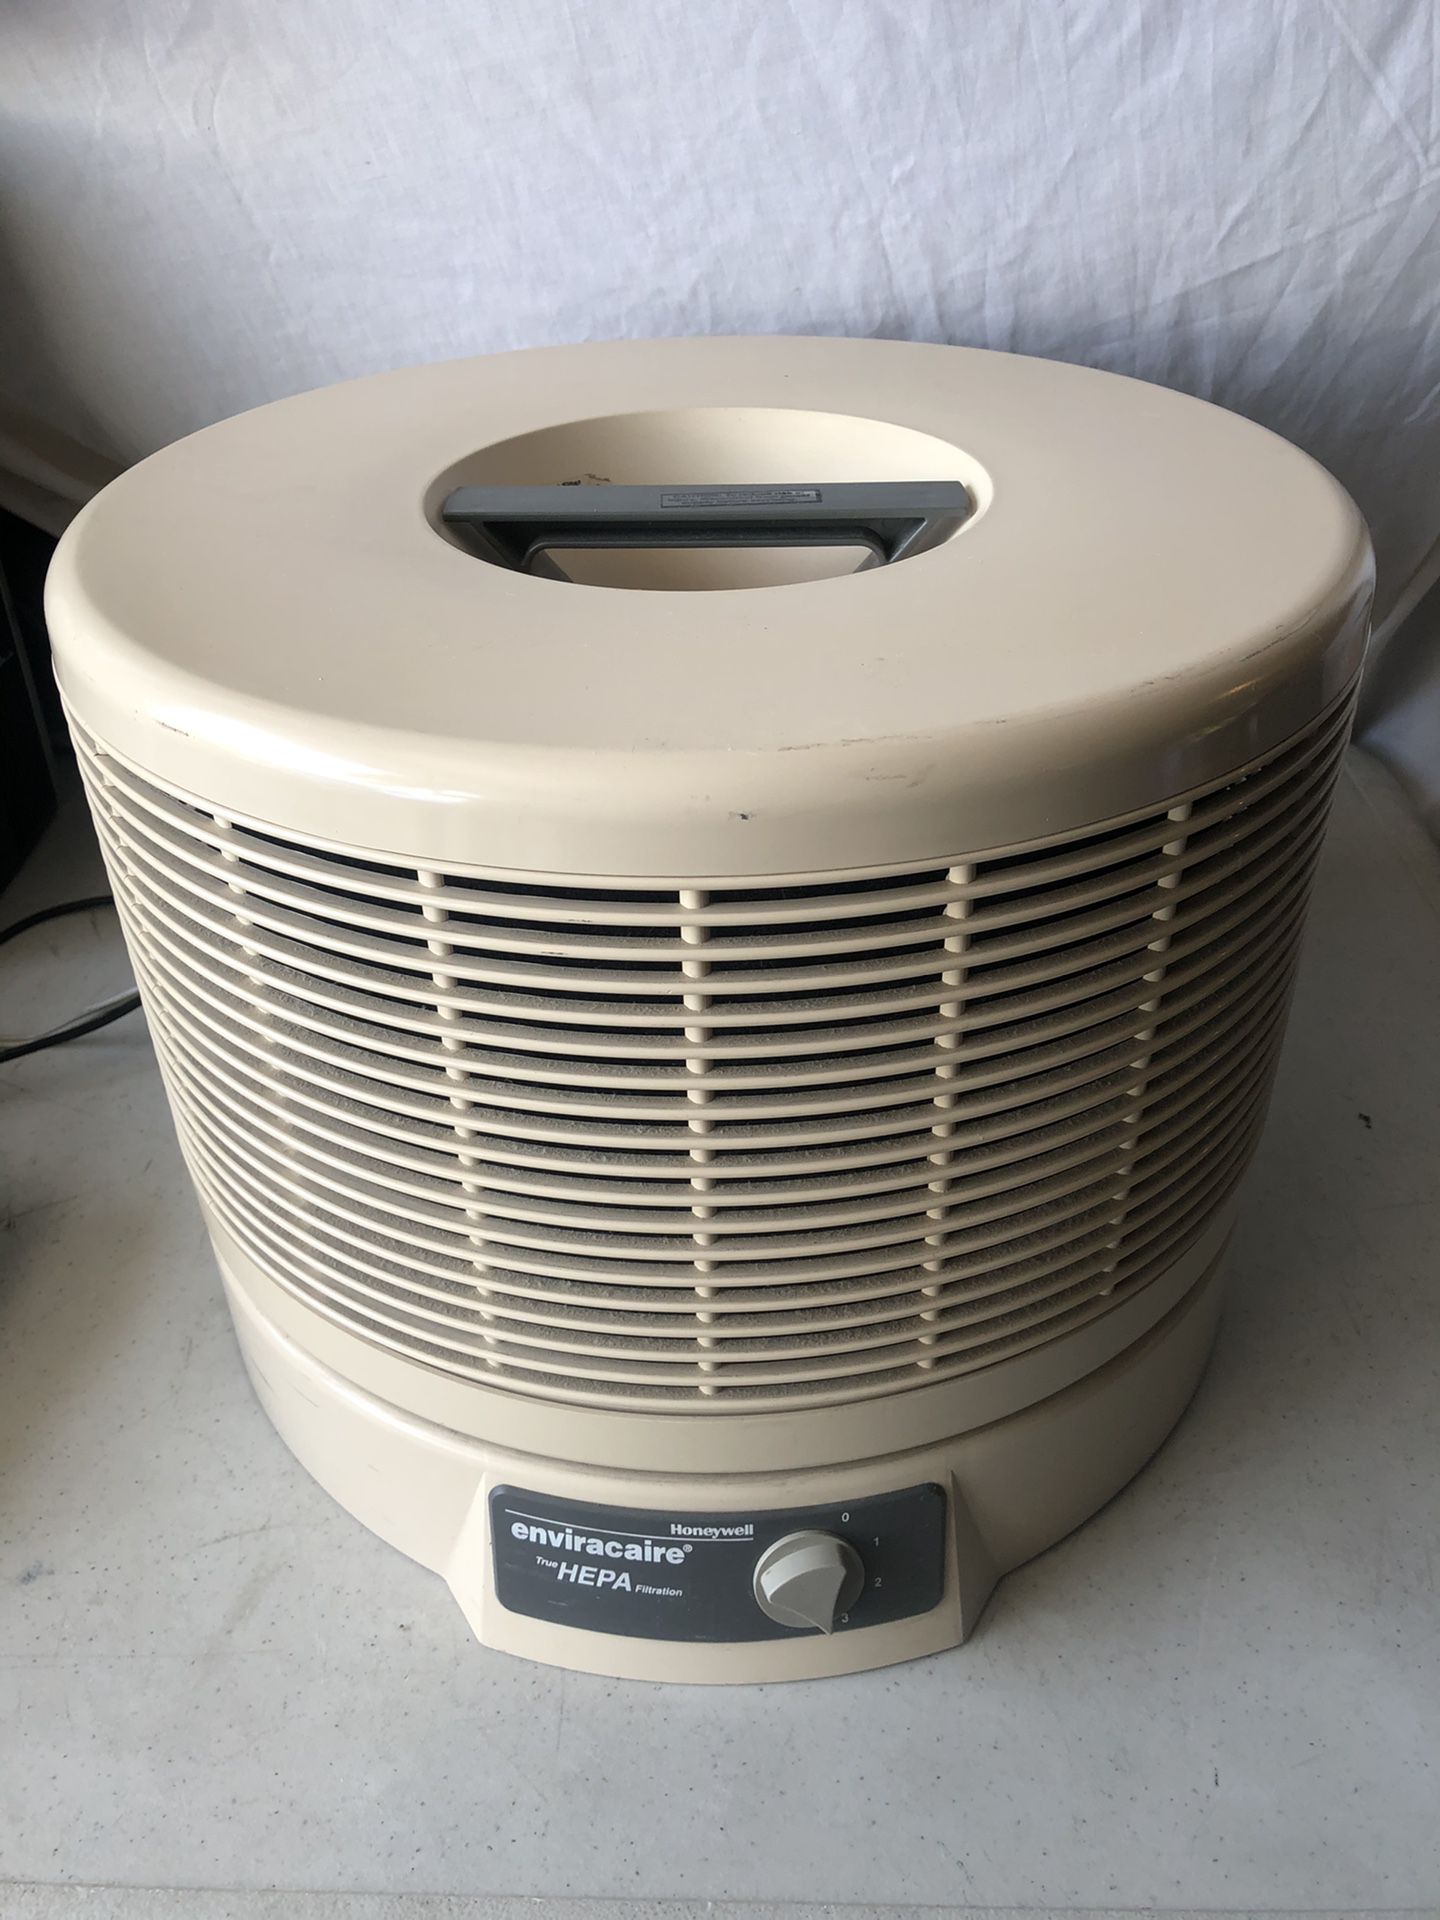 PRICE IS FIRM Honeywell 12520 HEPA Air Purifier COVERS 320 sq ft !!BRAND NEW FILTERS!! COMPLETELY CHANGES THE WHOLE AIR IN THE ROOM 6 times every hour